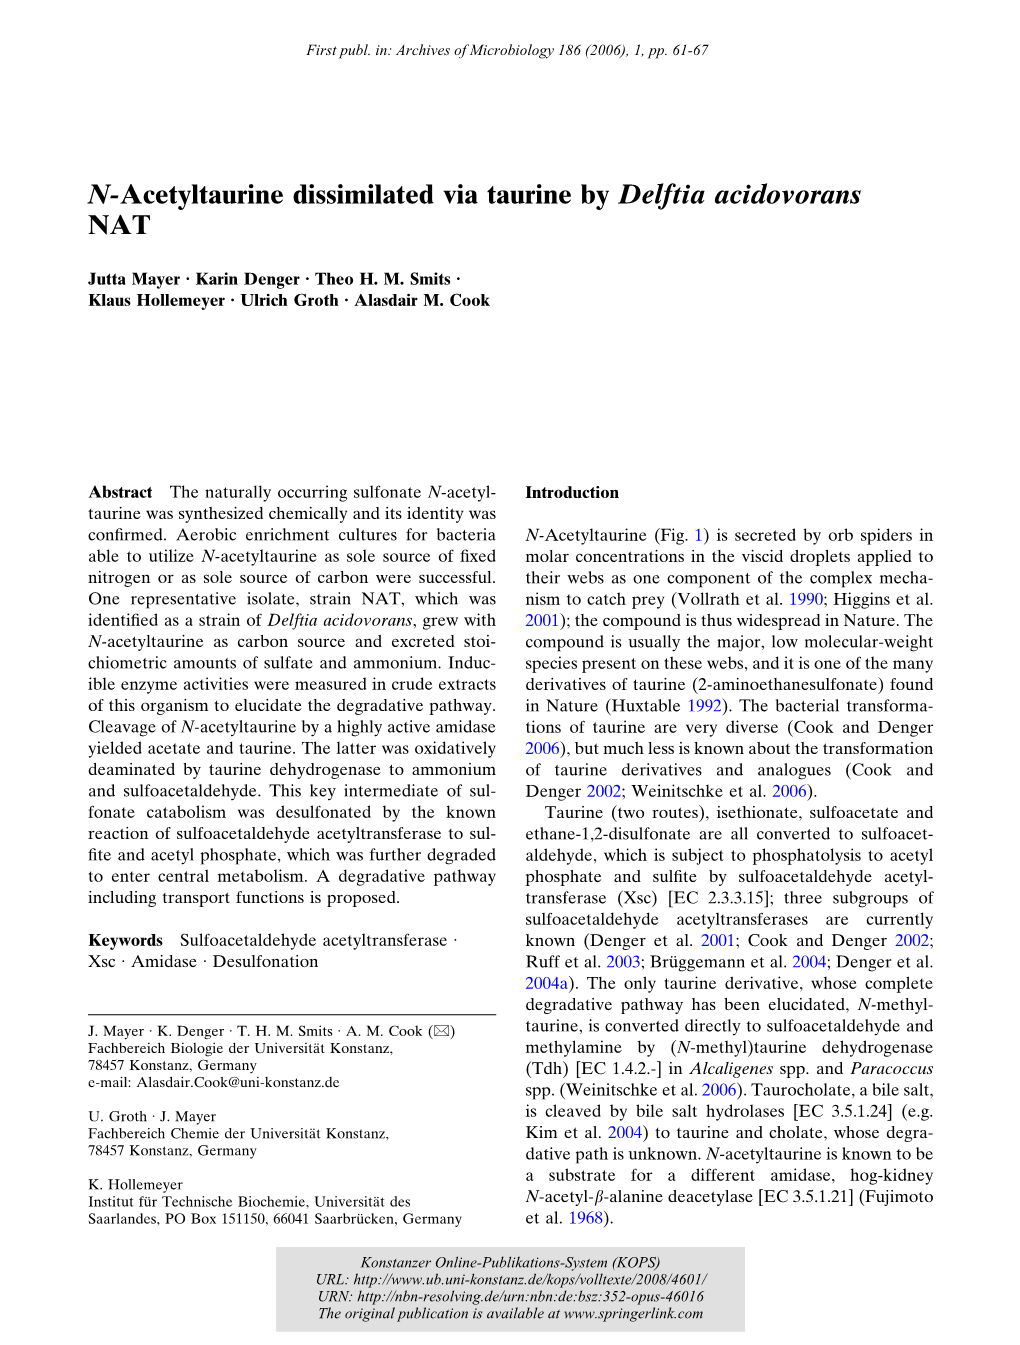 N-Acetyltaurine Dissimilated Via Taurine by Delftia Acidovorans NAT